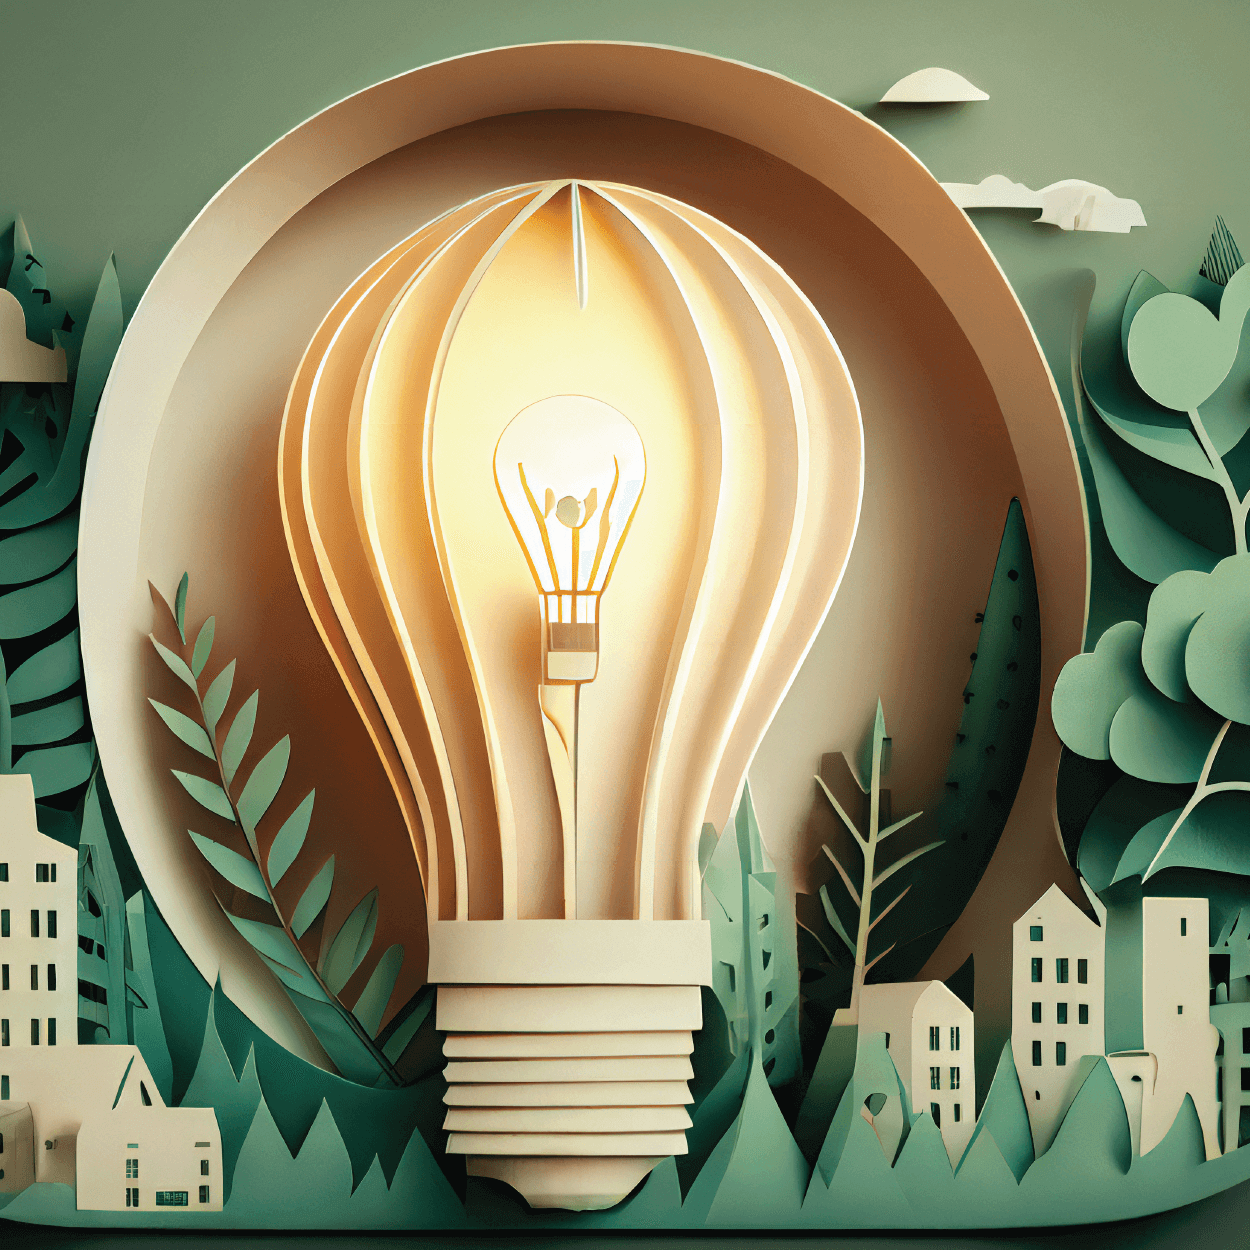 Lightbulb made out of paper, surrounded by small city buildings, trees, and clouds